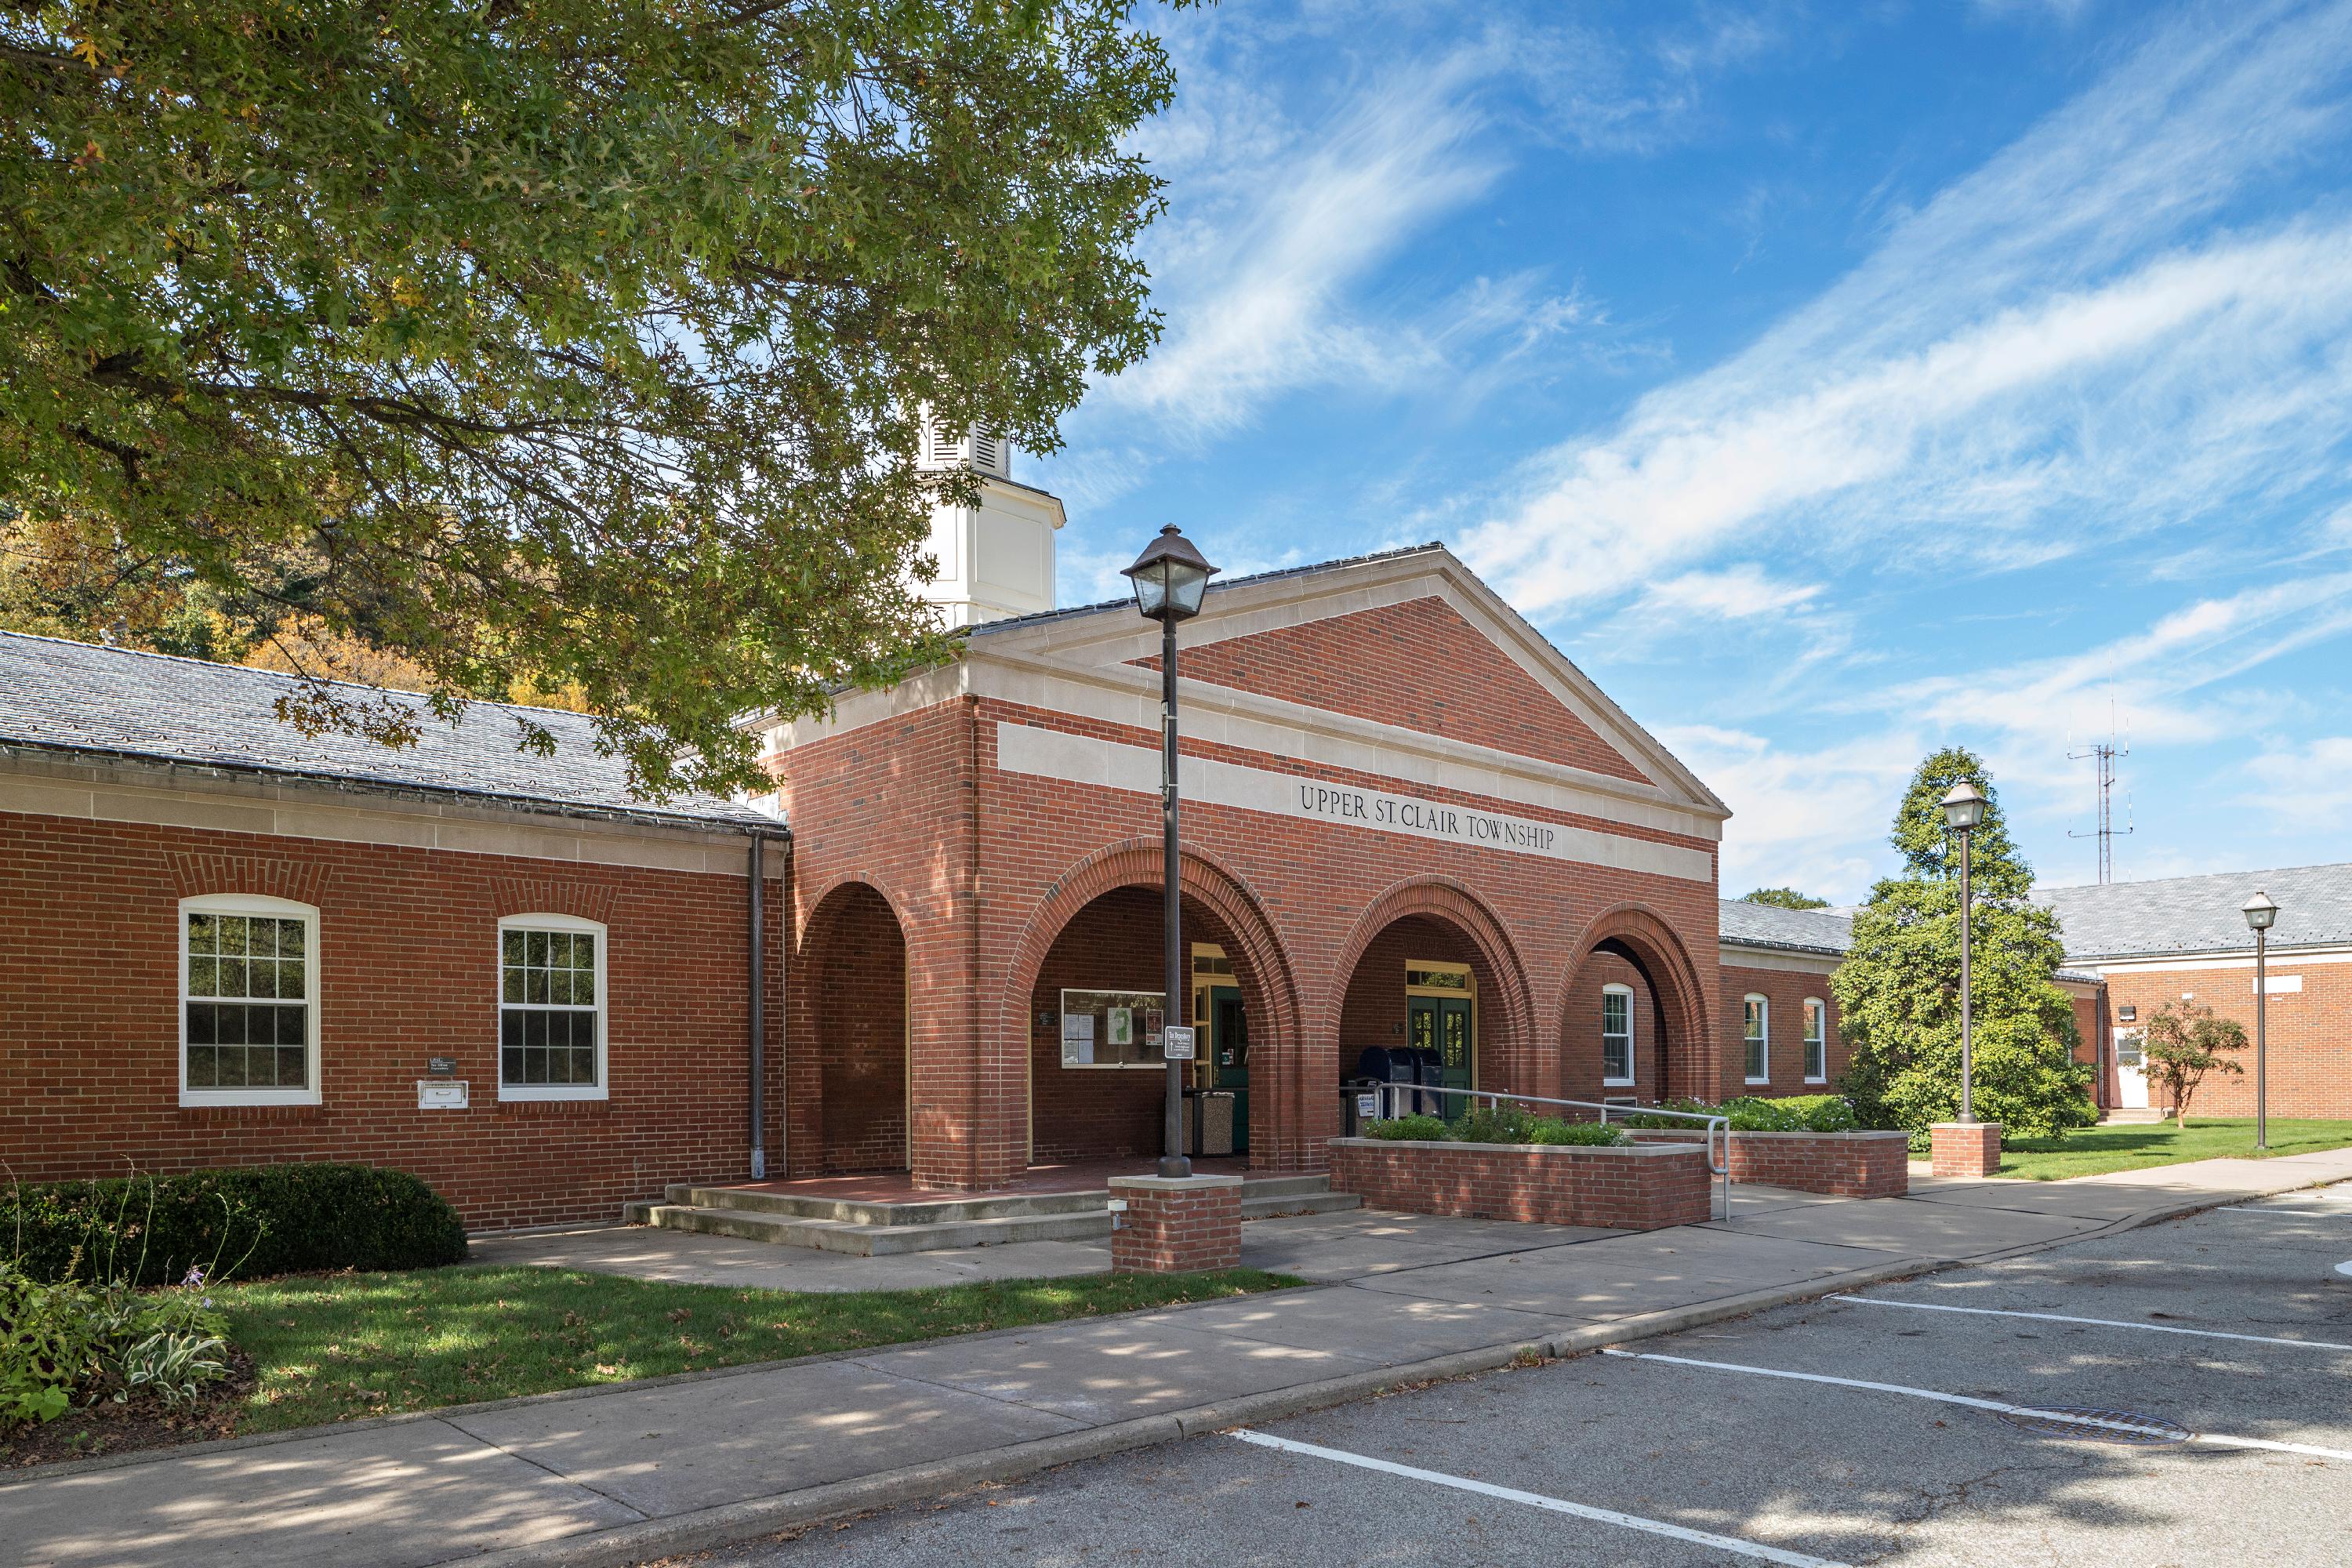 Upper St. Clair Township Building 